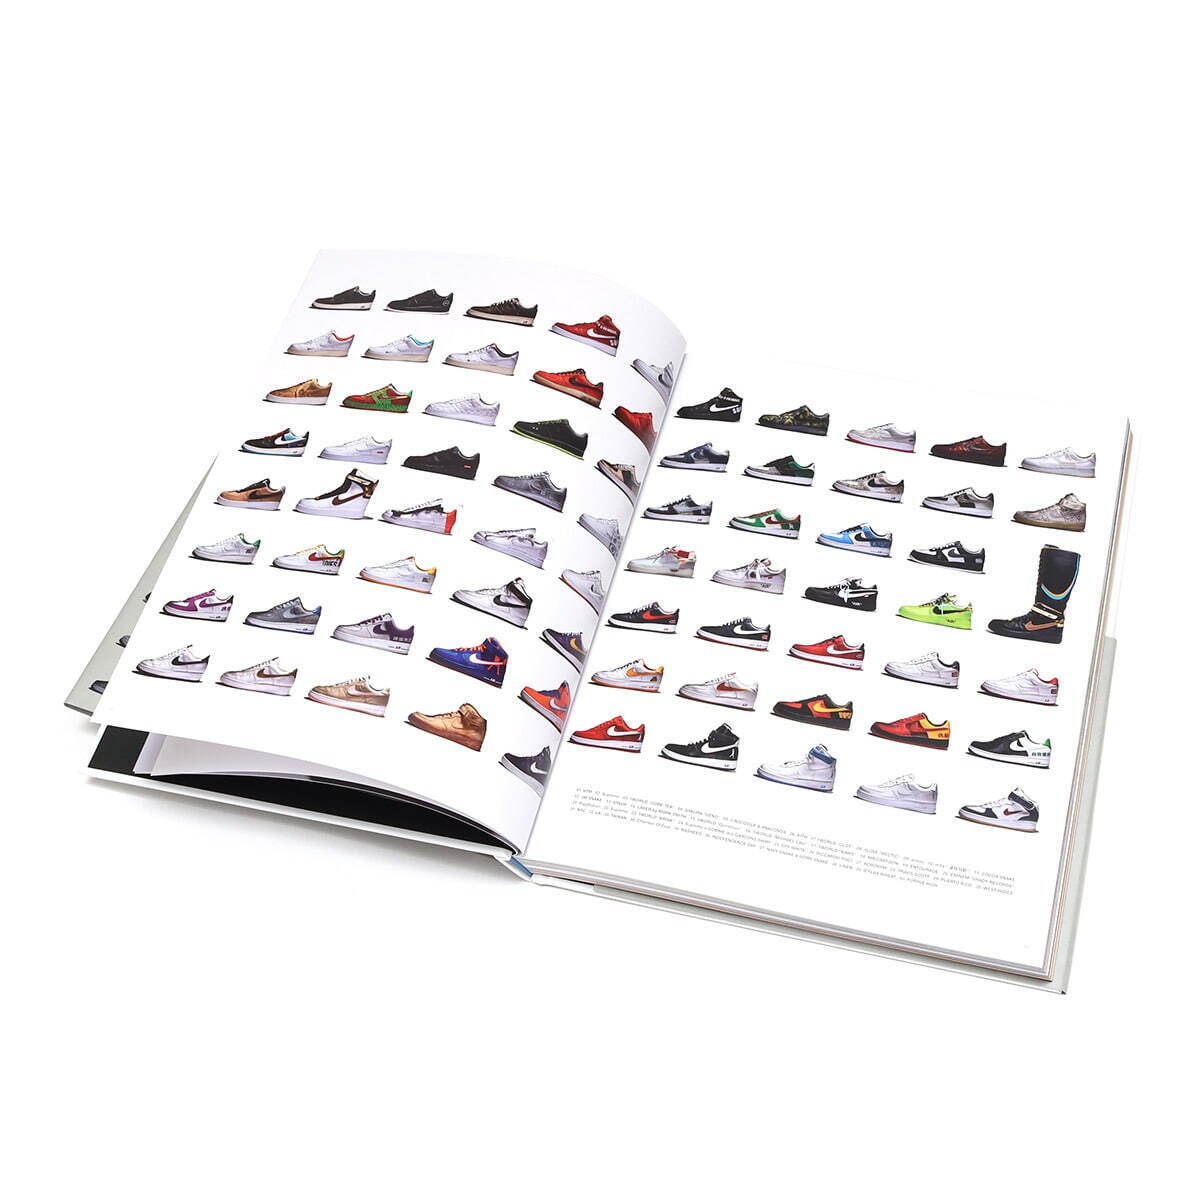 『AIR FORCE 1 40th Special Book』6,600円